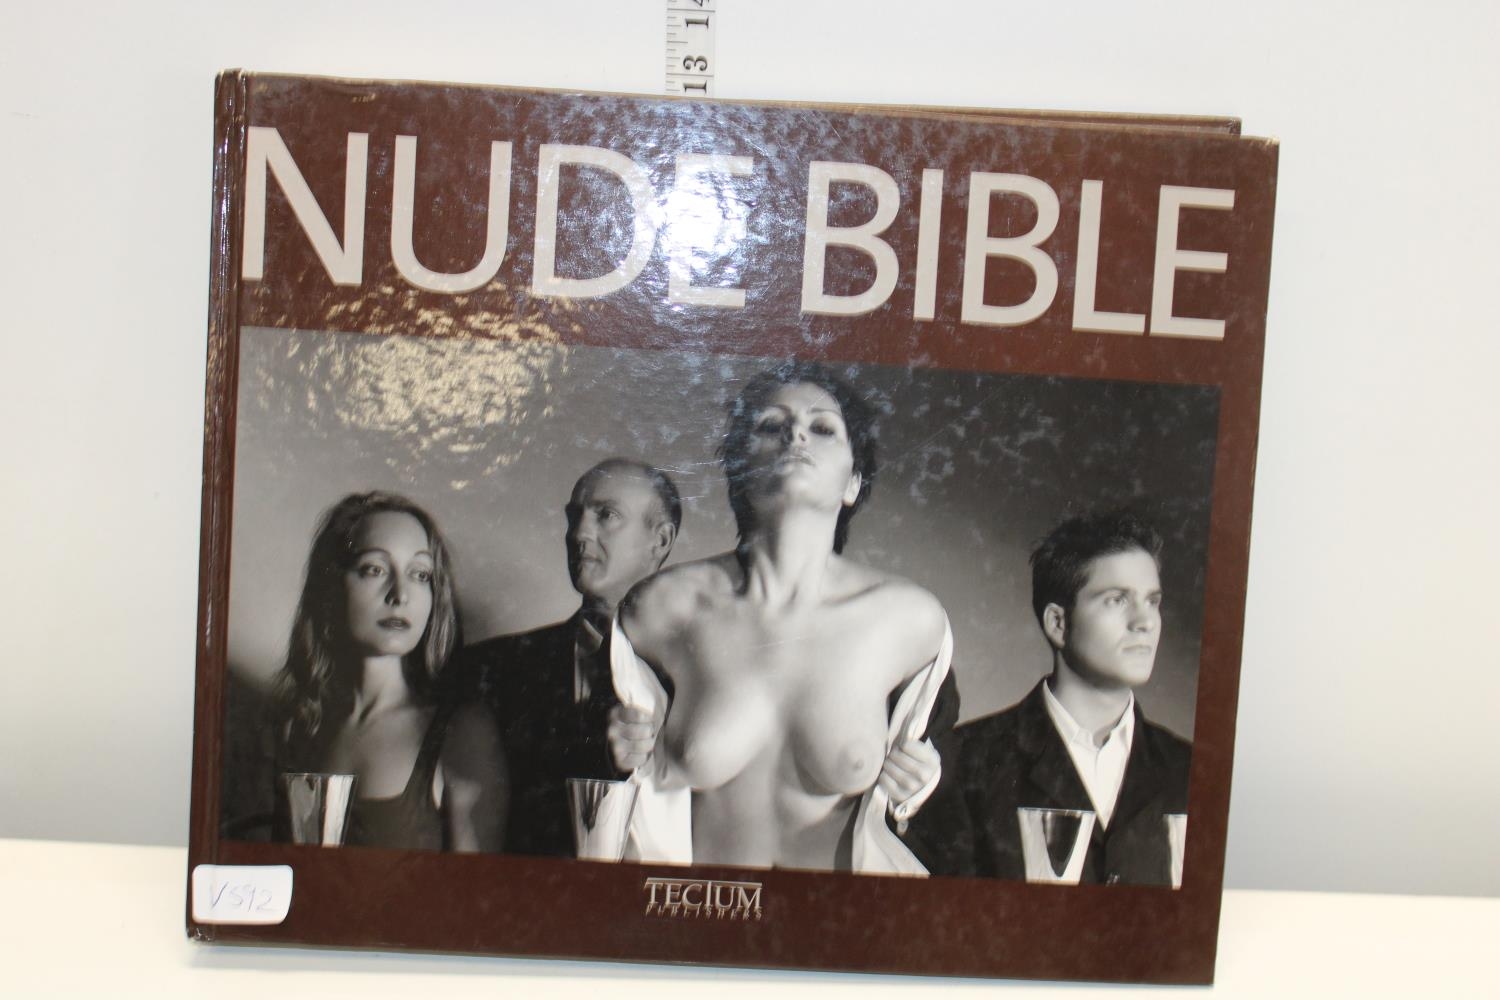 A Nude Bible published by TecTum